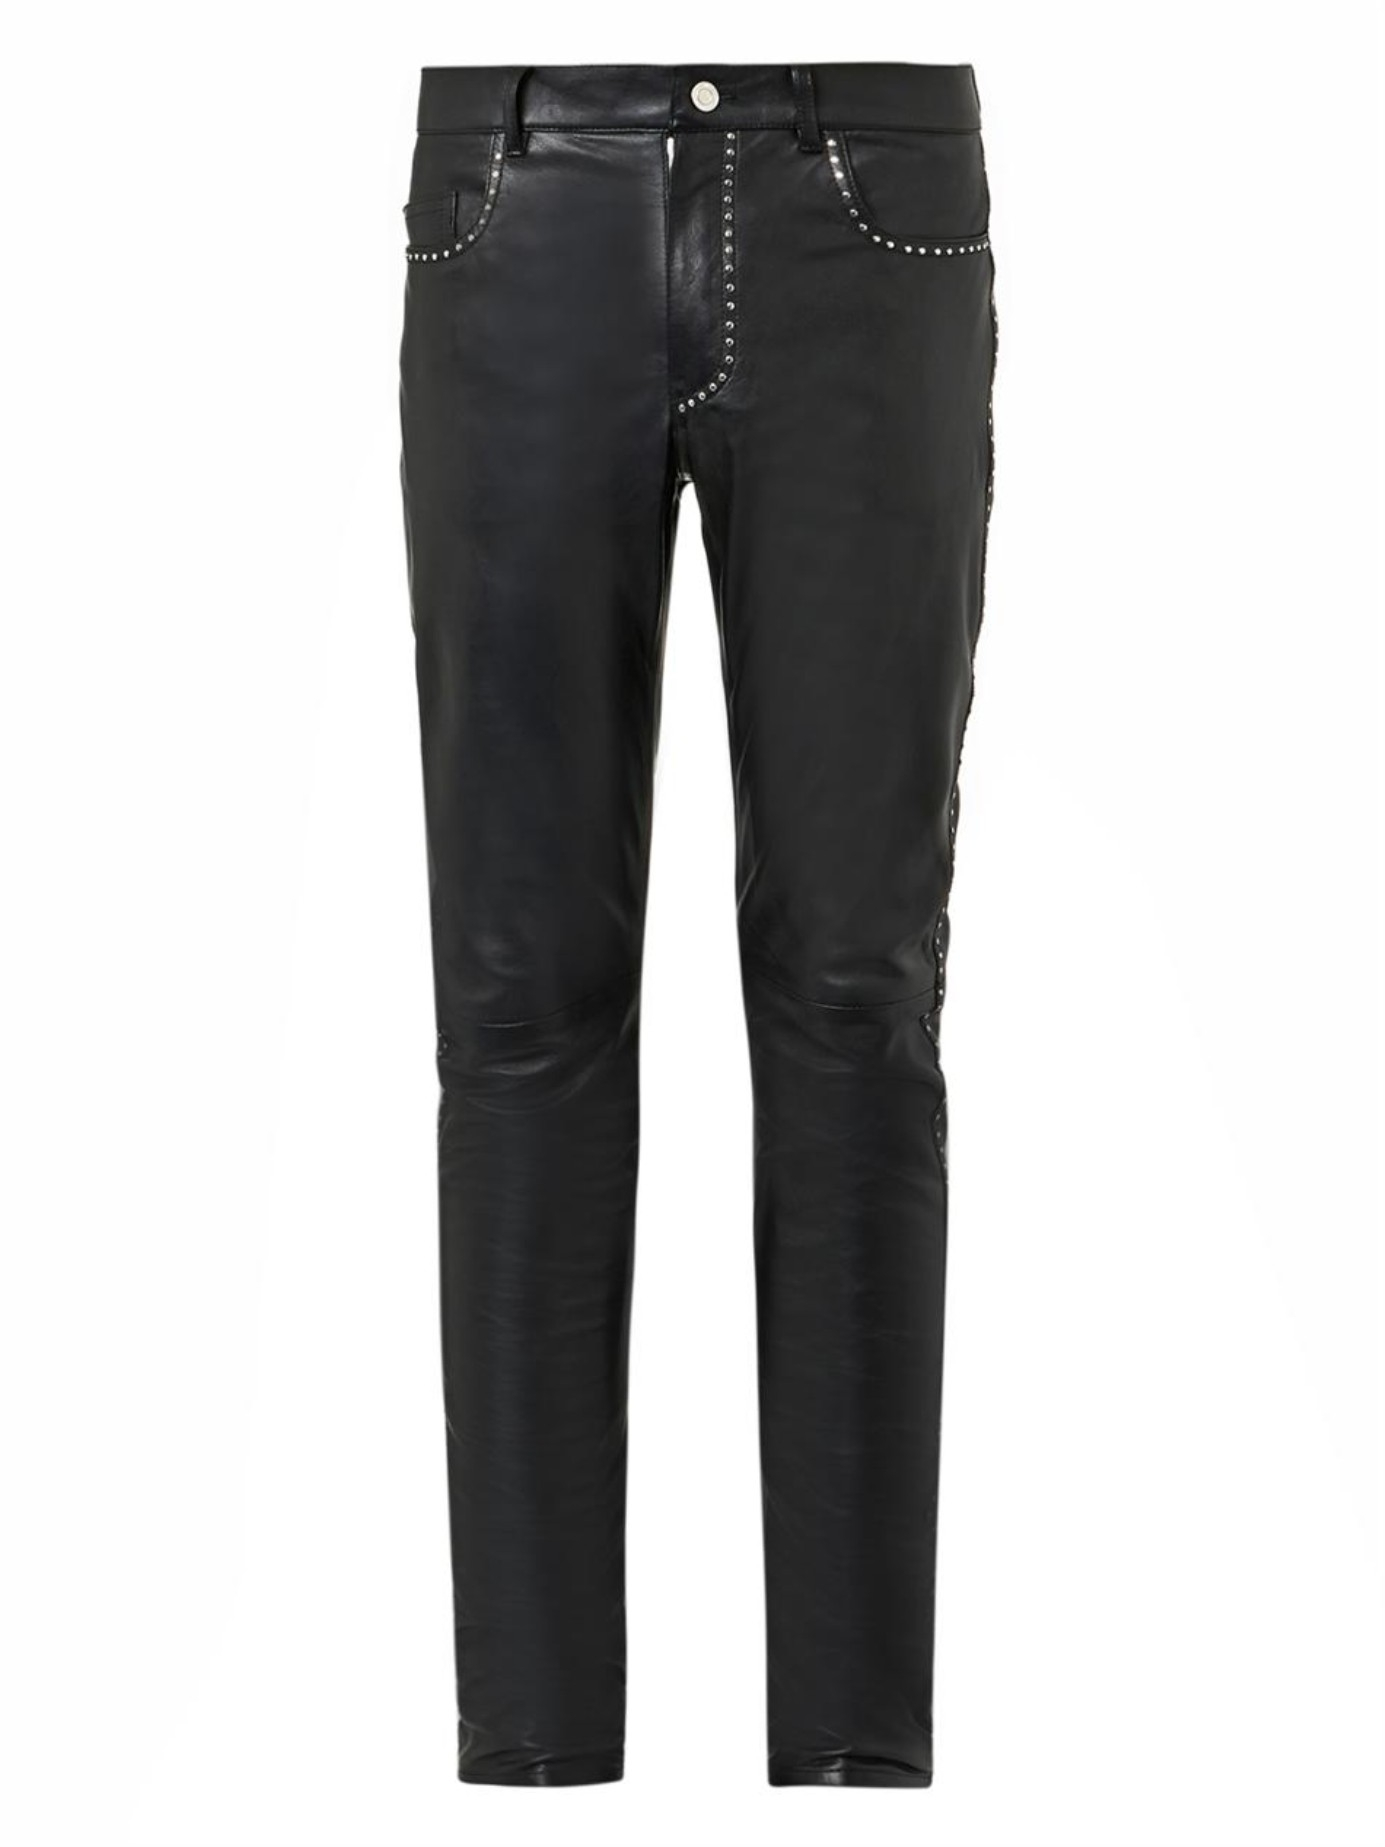 Saint Laurent Studded Leather Trousers in Black for Men - Lyst